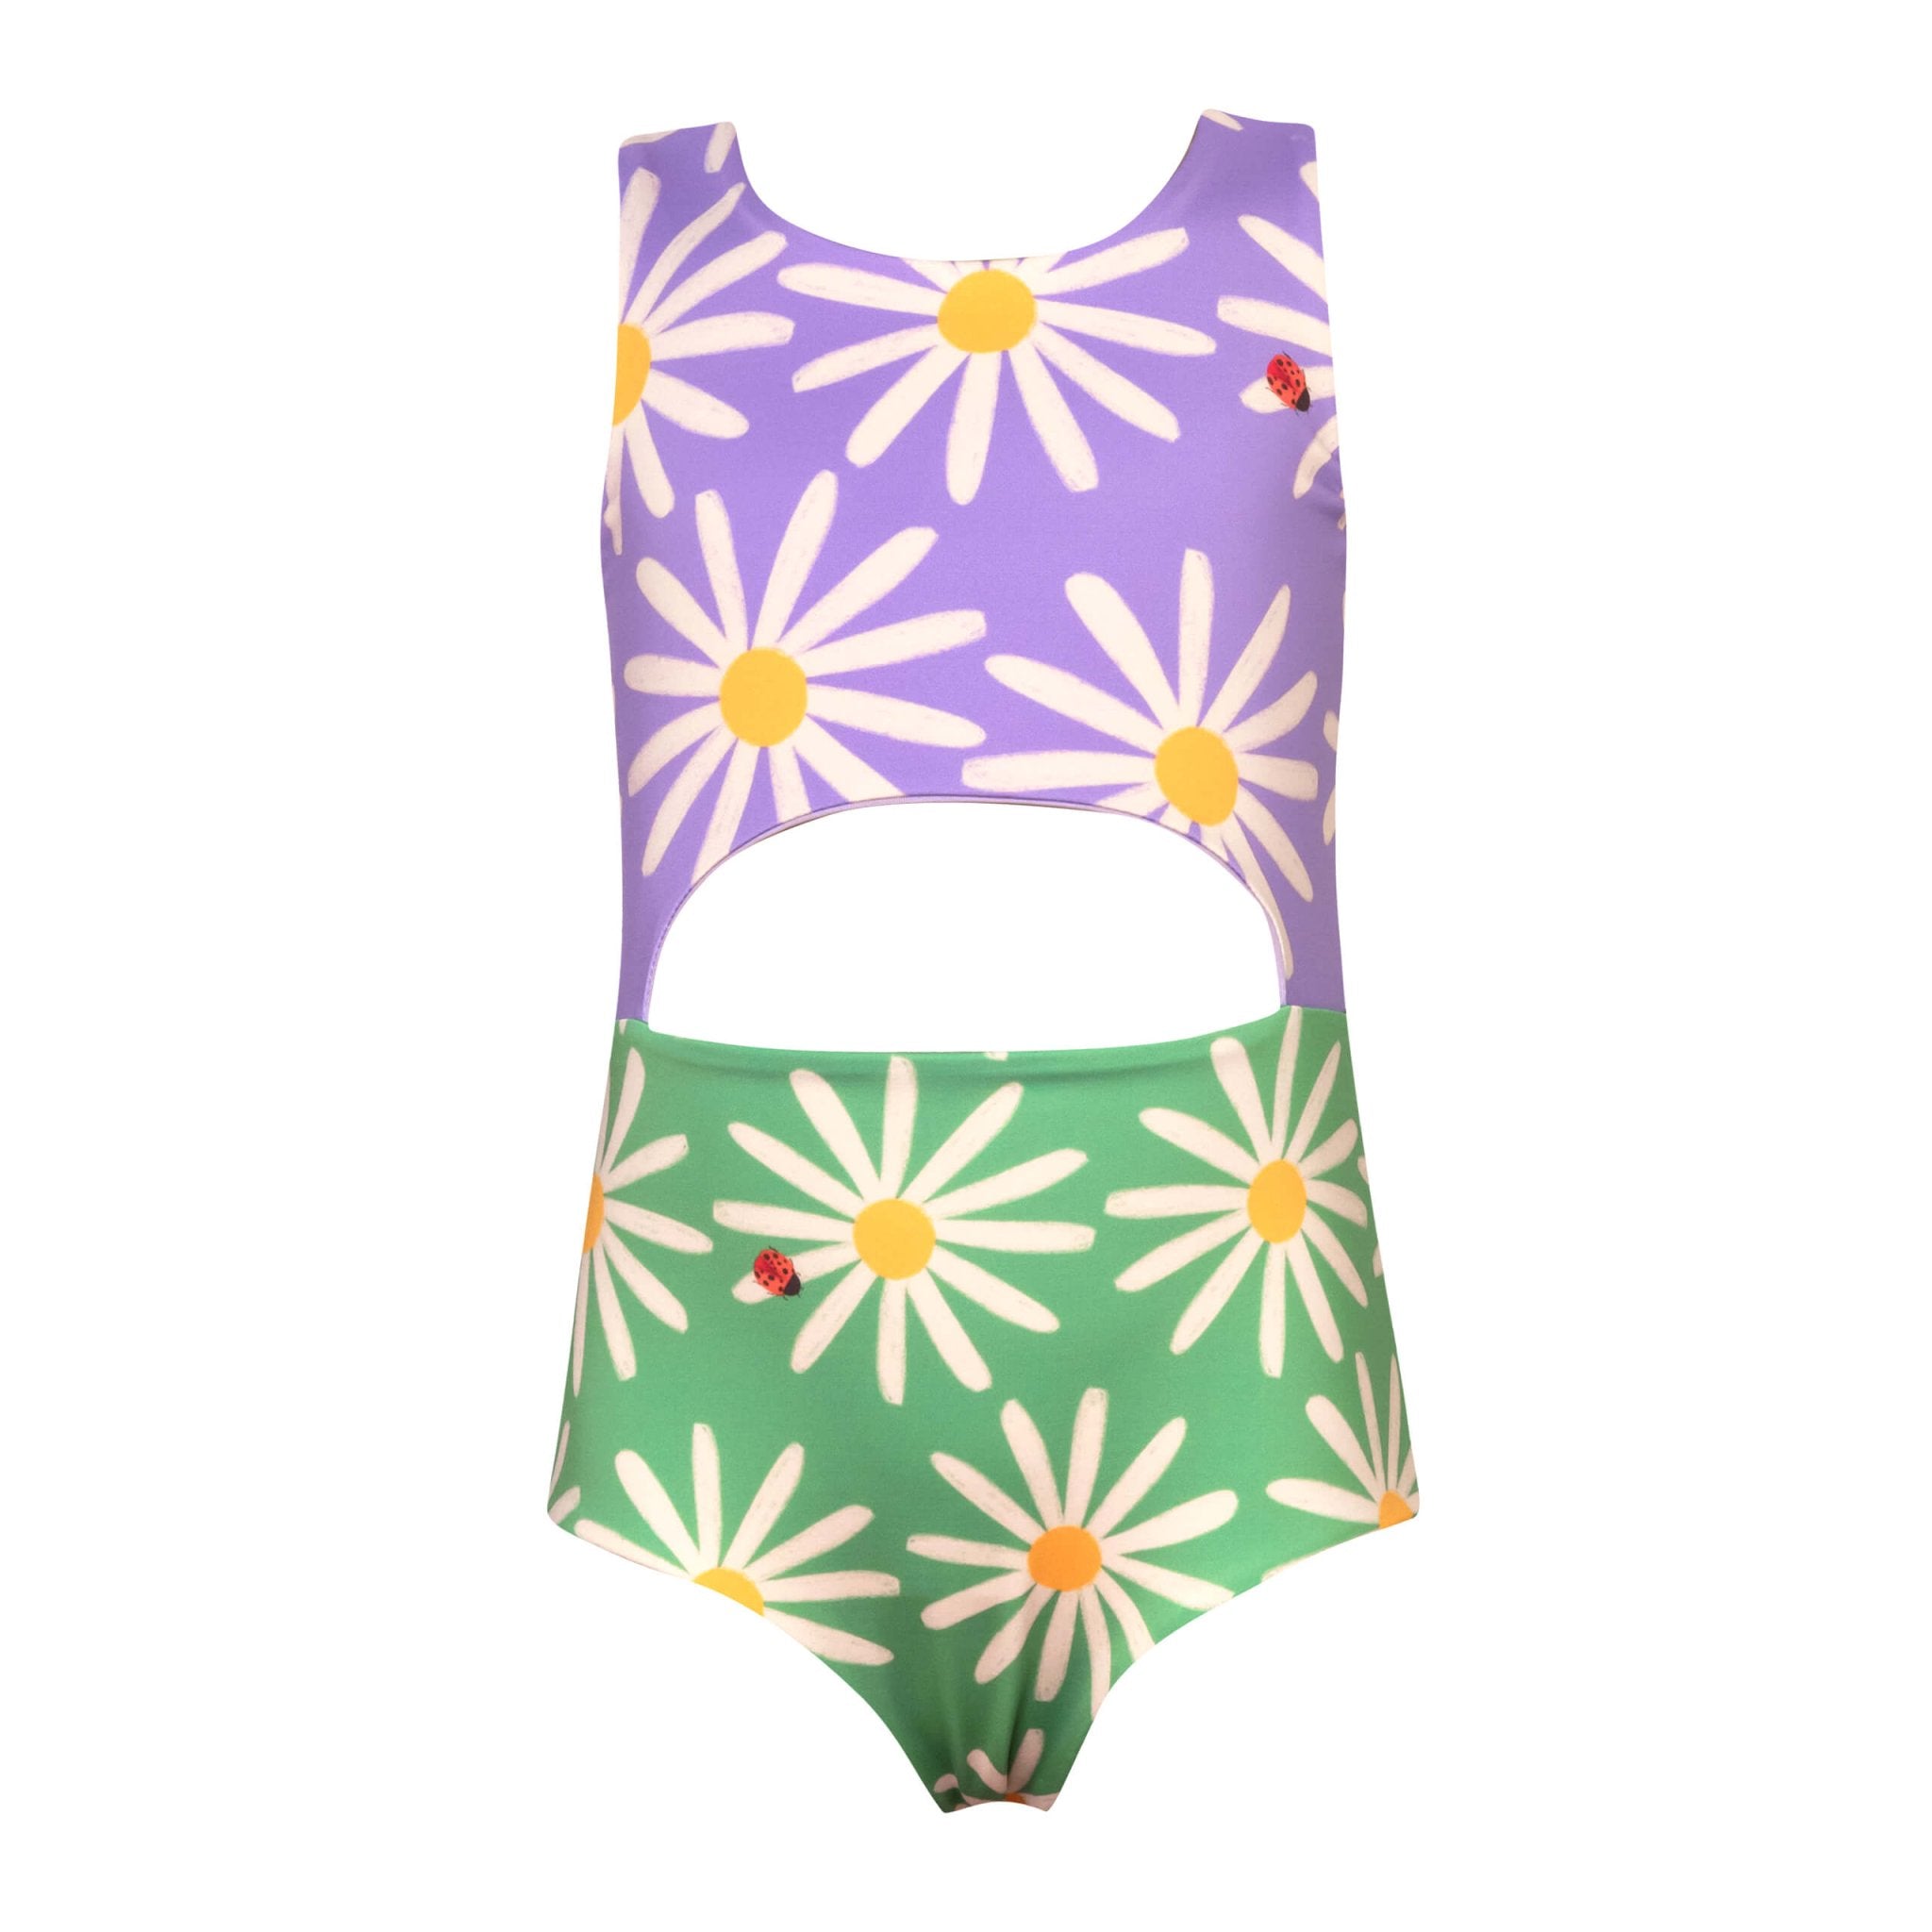 Cute little girls one piece bikini. Half purple and half green with cute flower and ladybug pattern all over. The swimsuit has a cutout in the middle. 